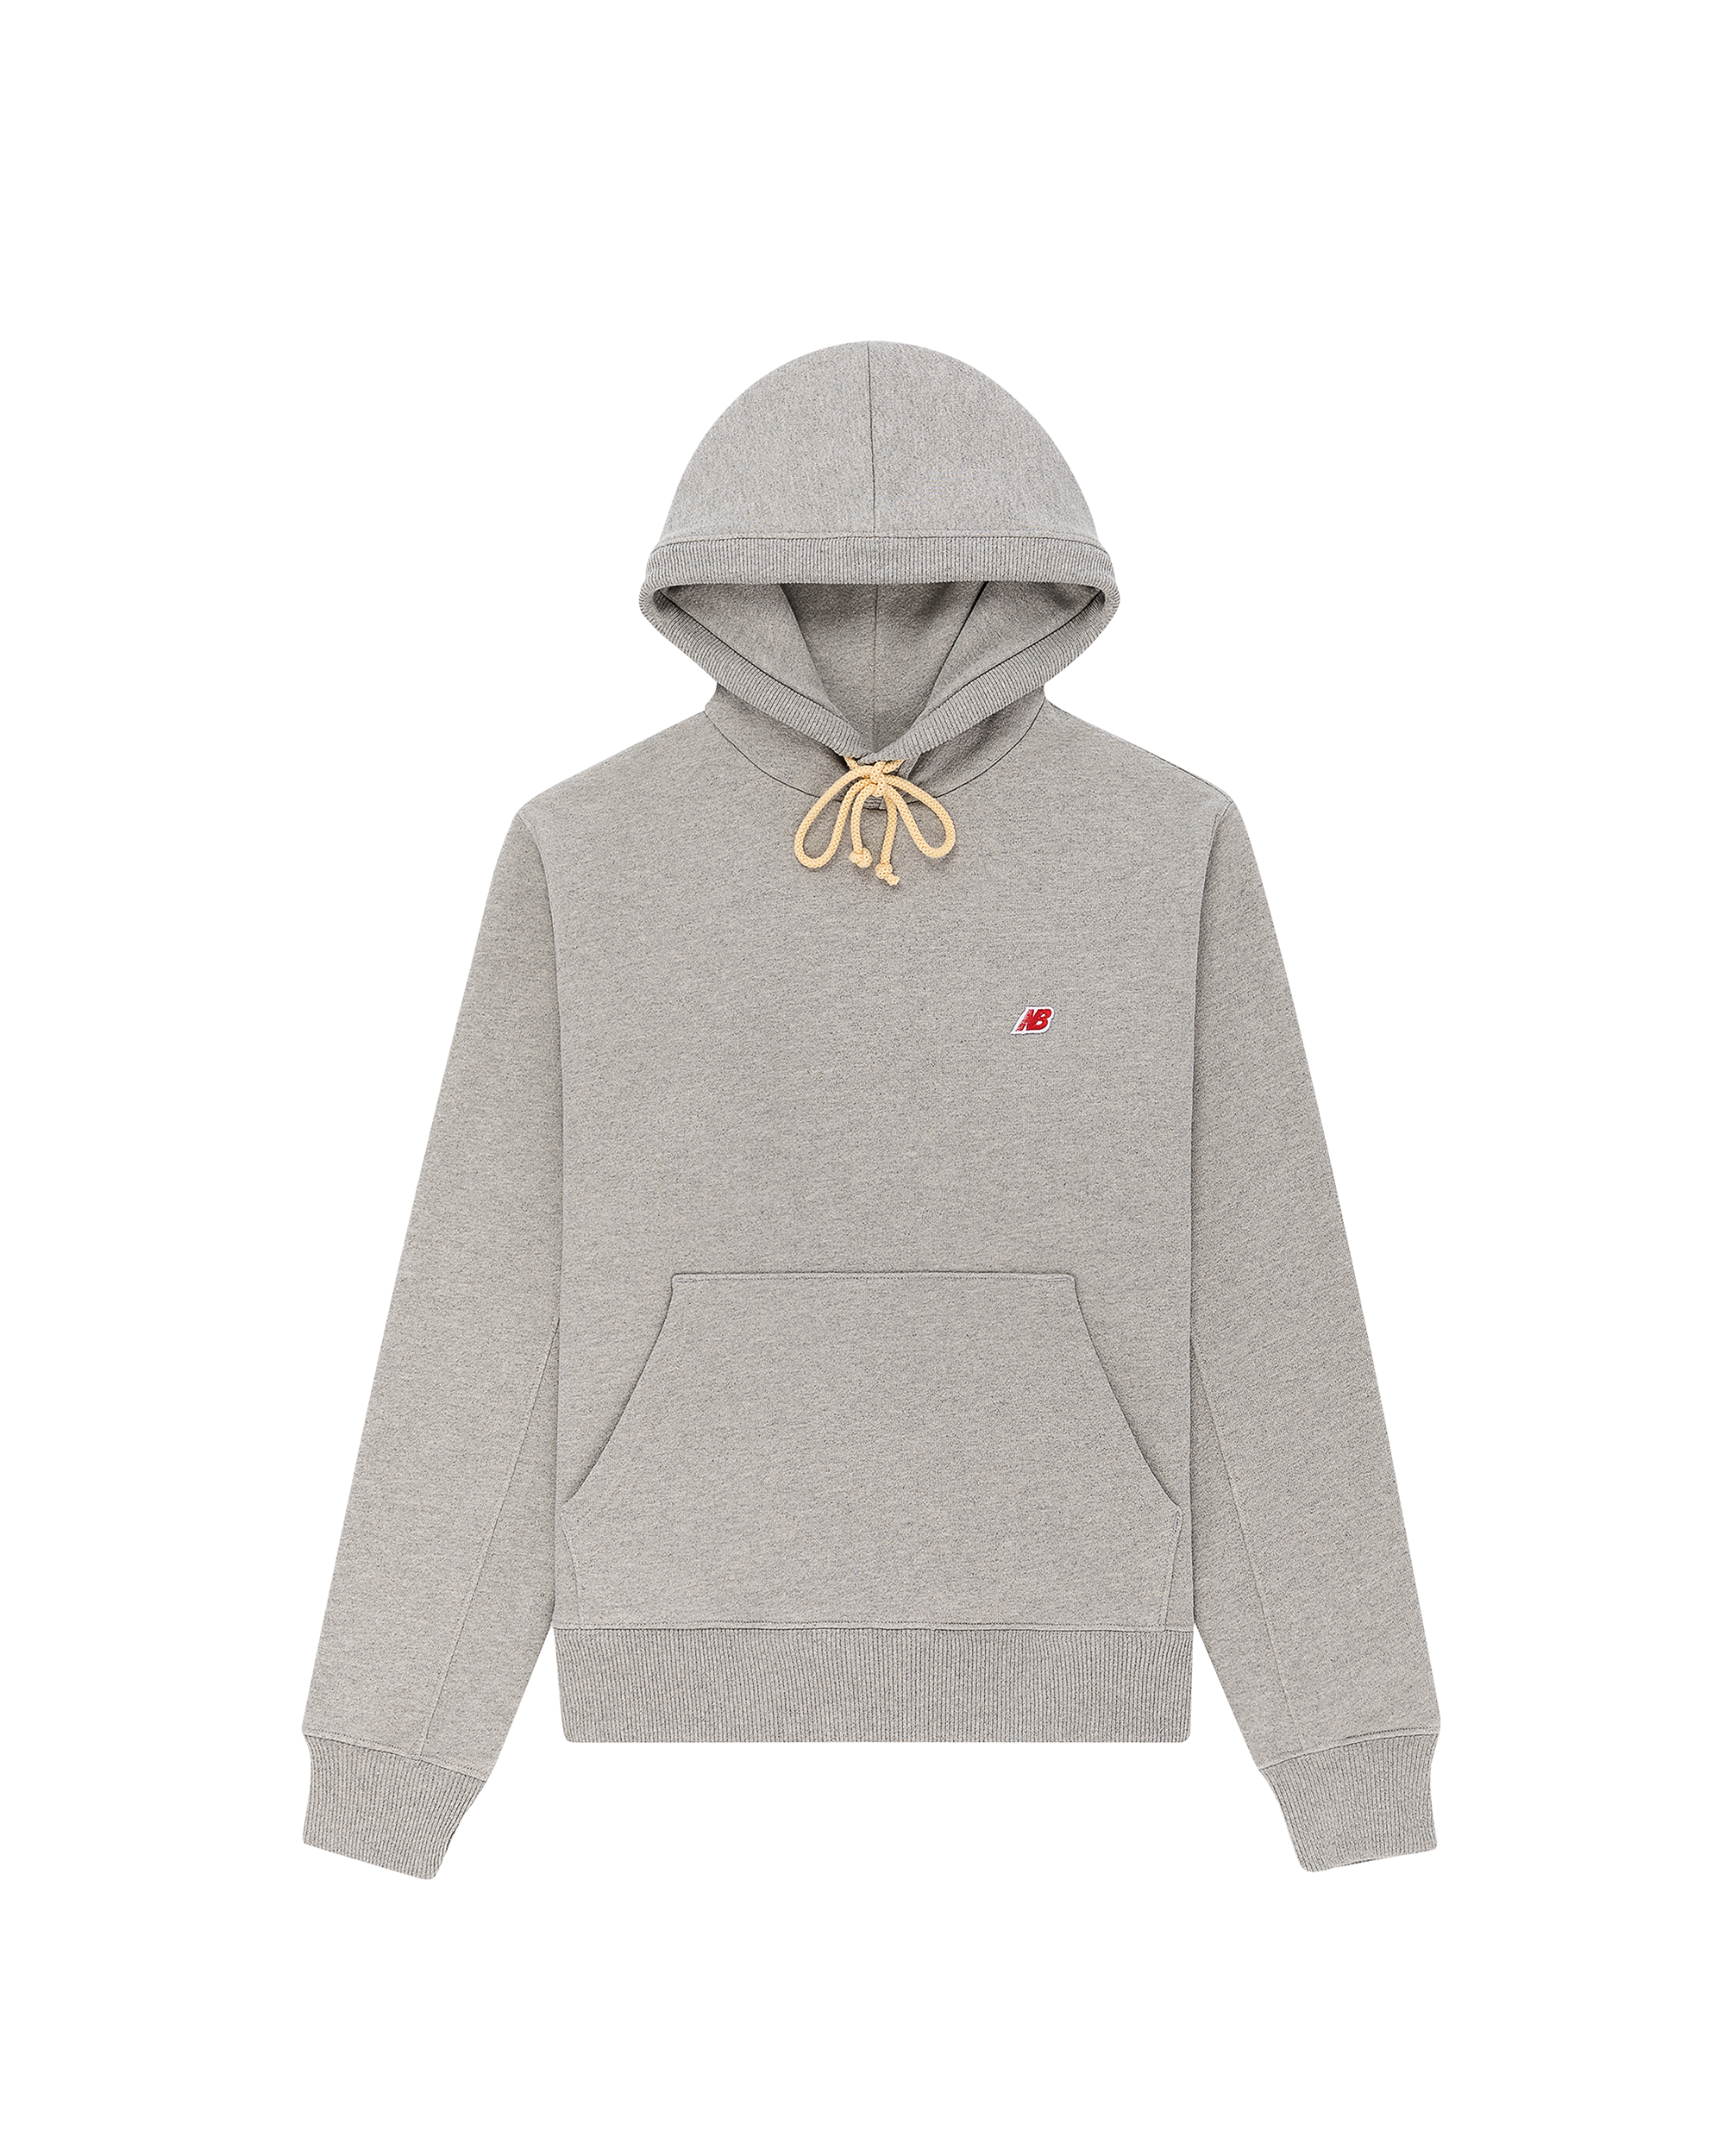 Made in USA Hooded Sweatshirt - Athletic Gray